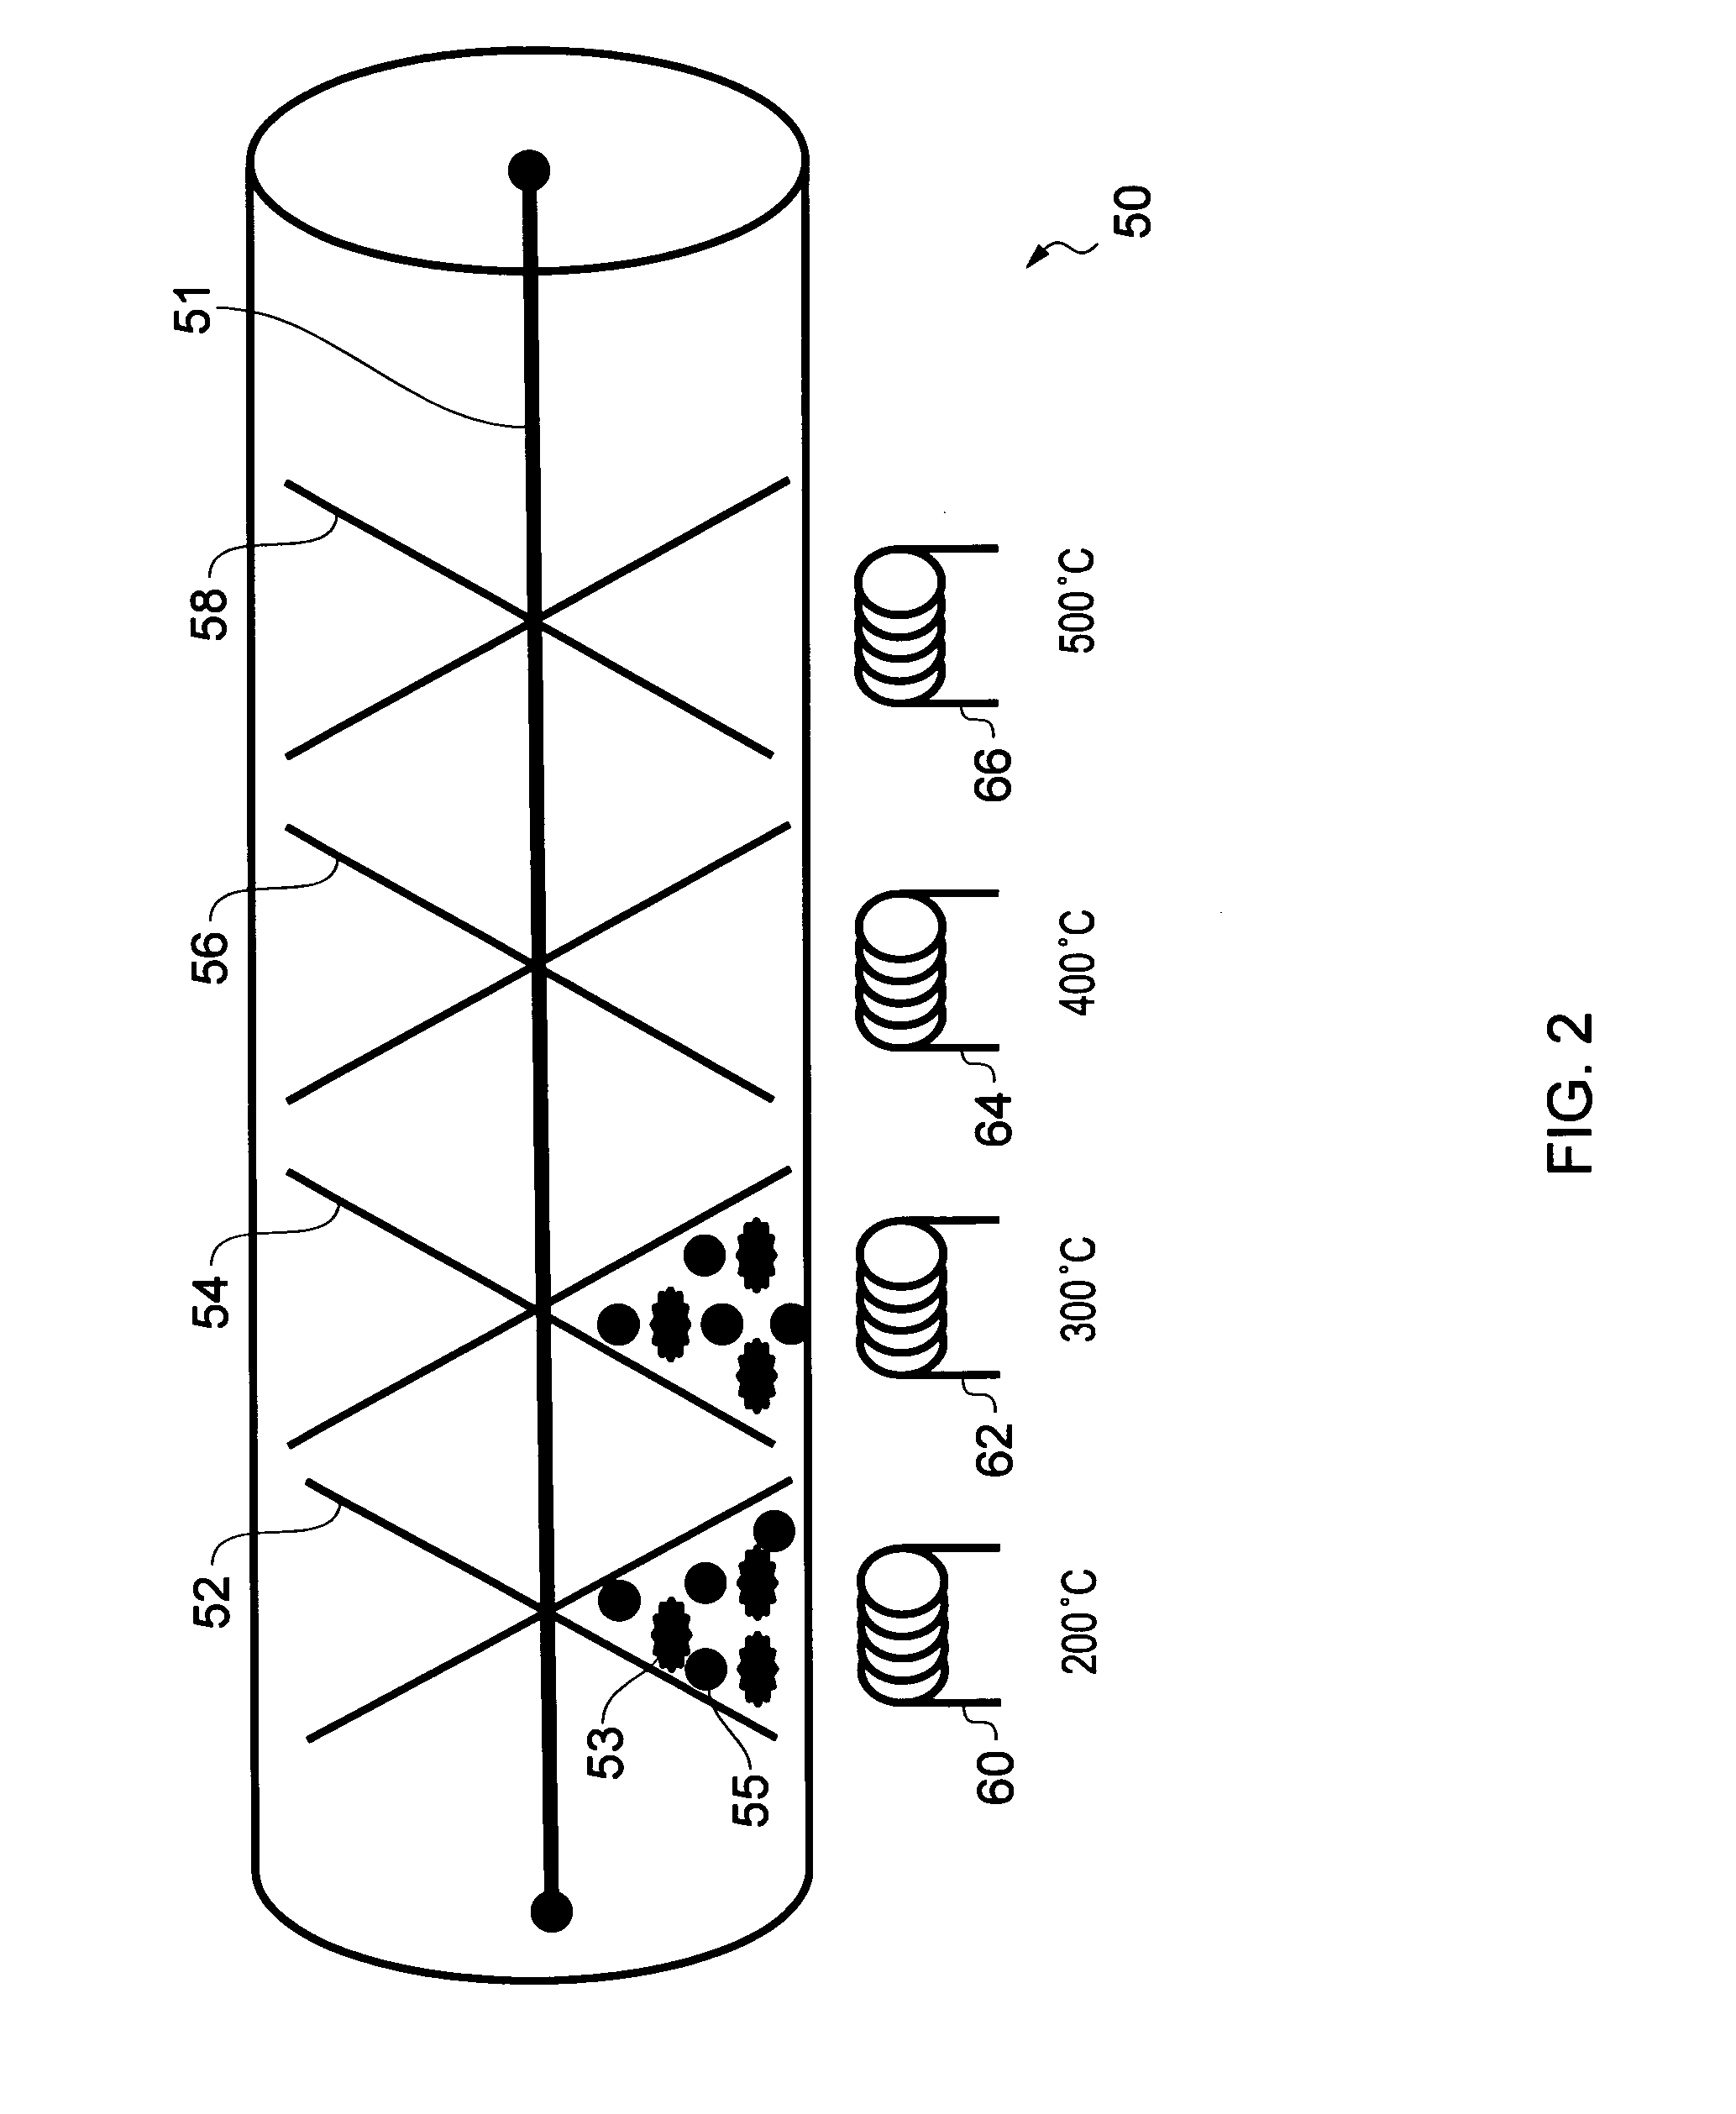 Staged biomass pyrolysis process and apparatus